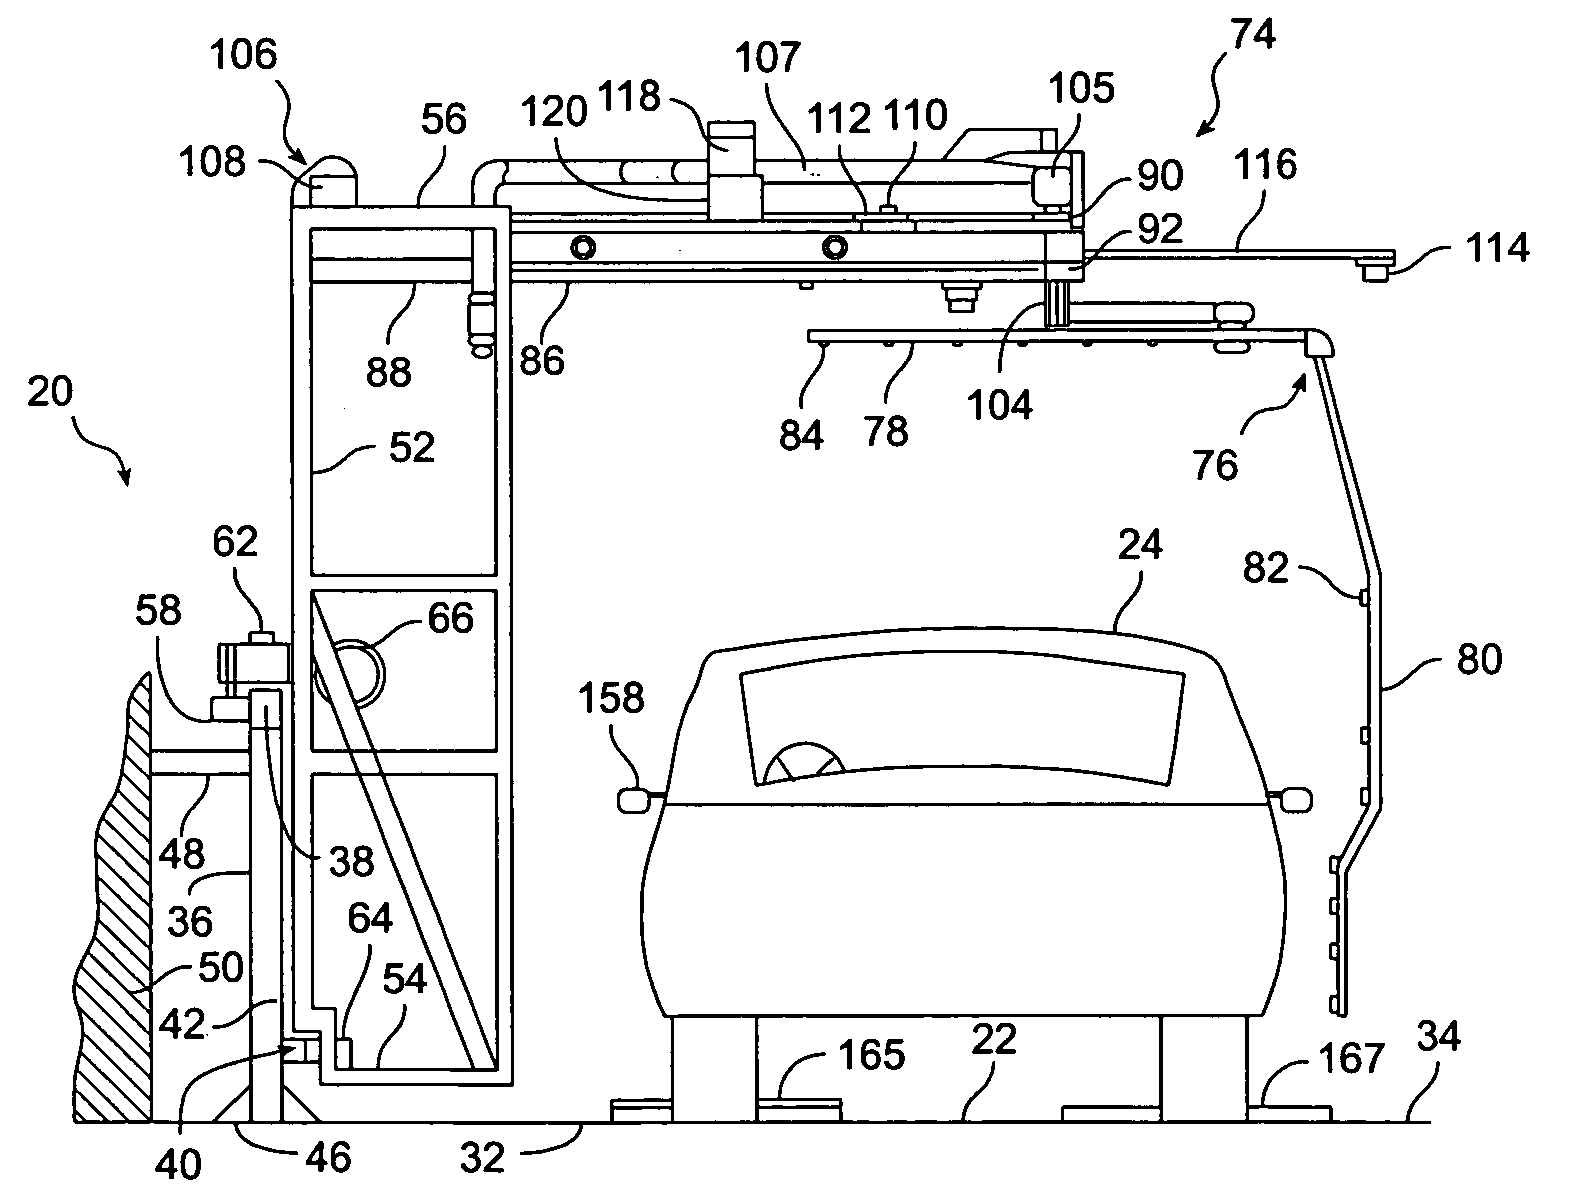 Sidetrack vehicle washer with rotating spray arm